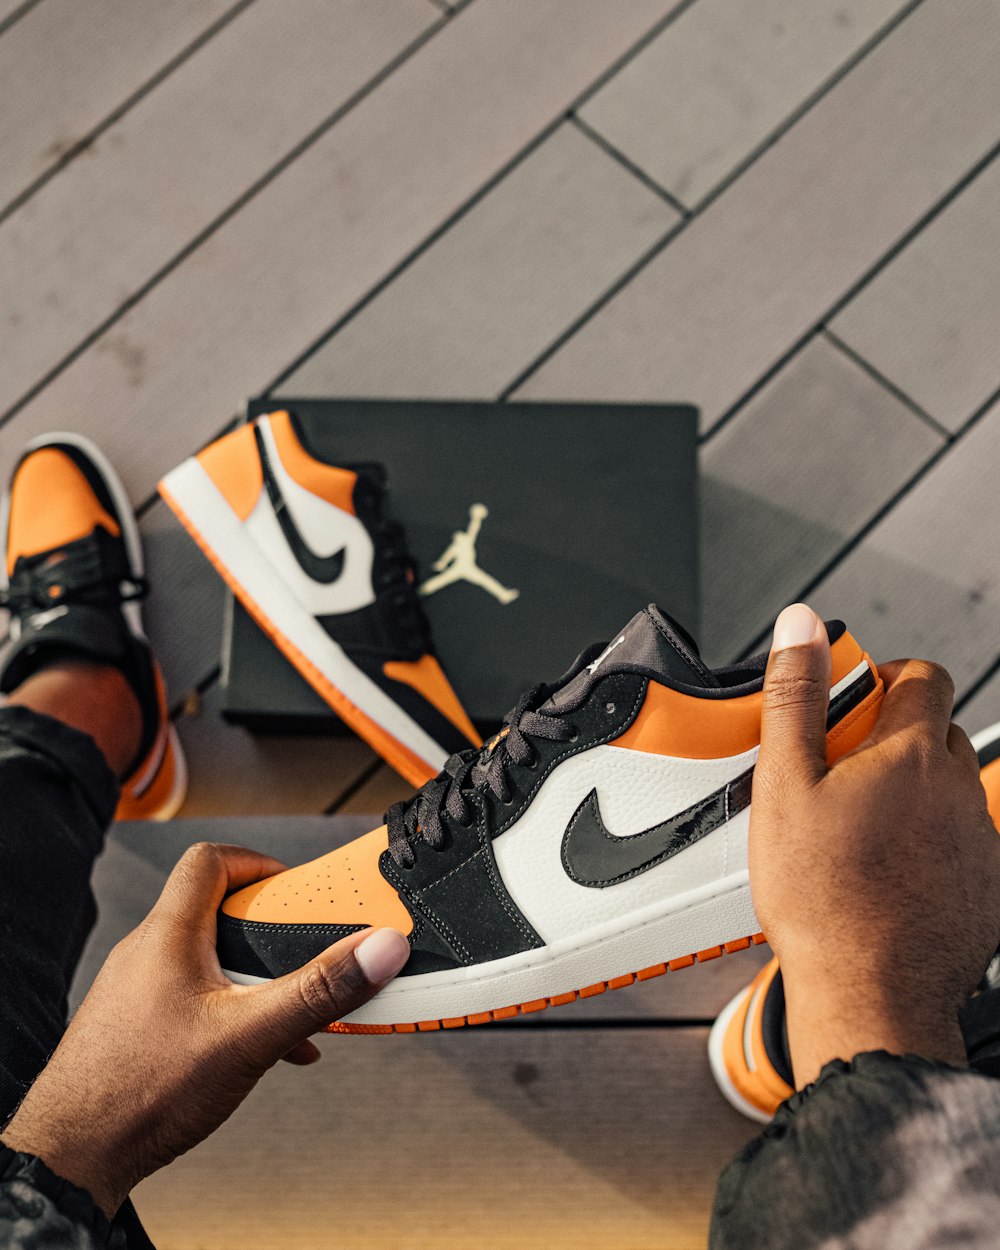 Person Sitting And Holding White Orange And Black Air Jordan 1 Low Top Sneaker Photo Free Image On Unsplash